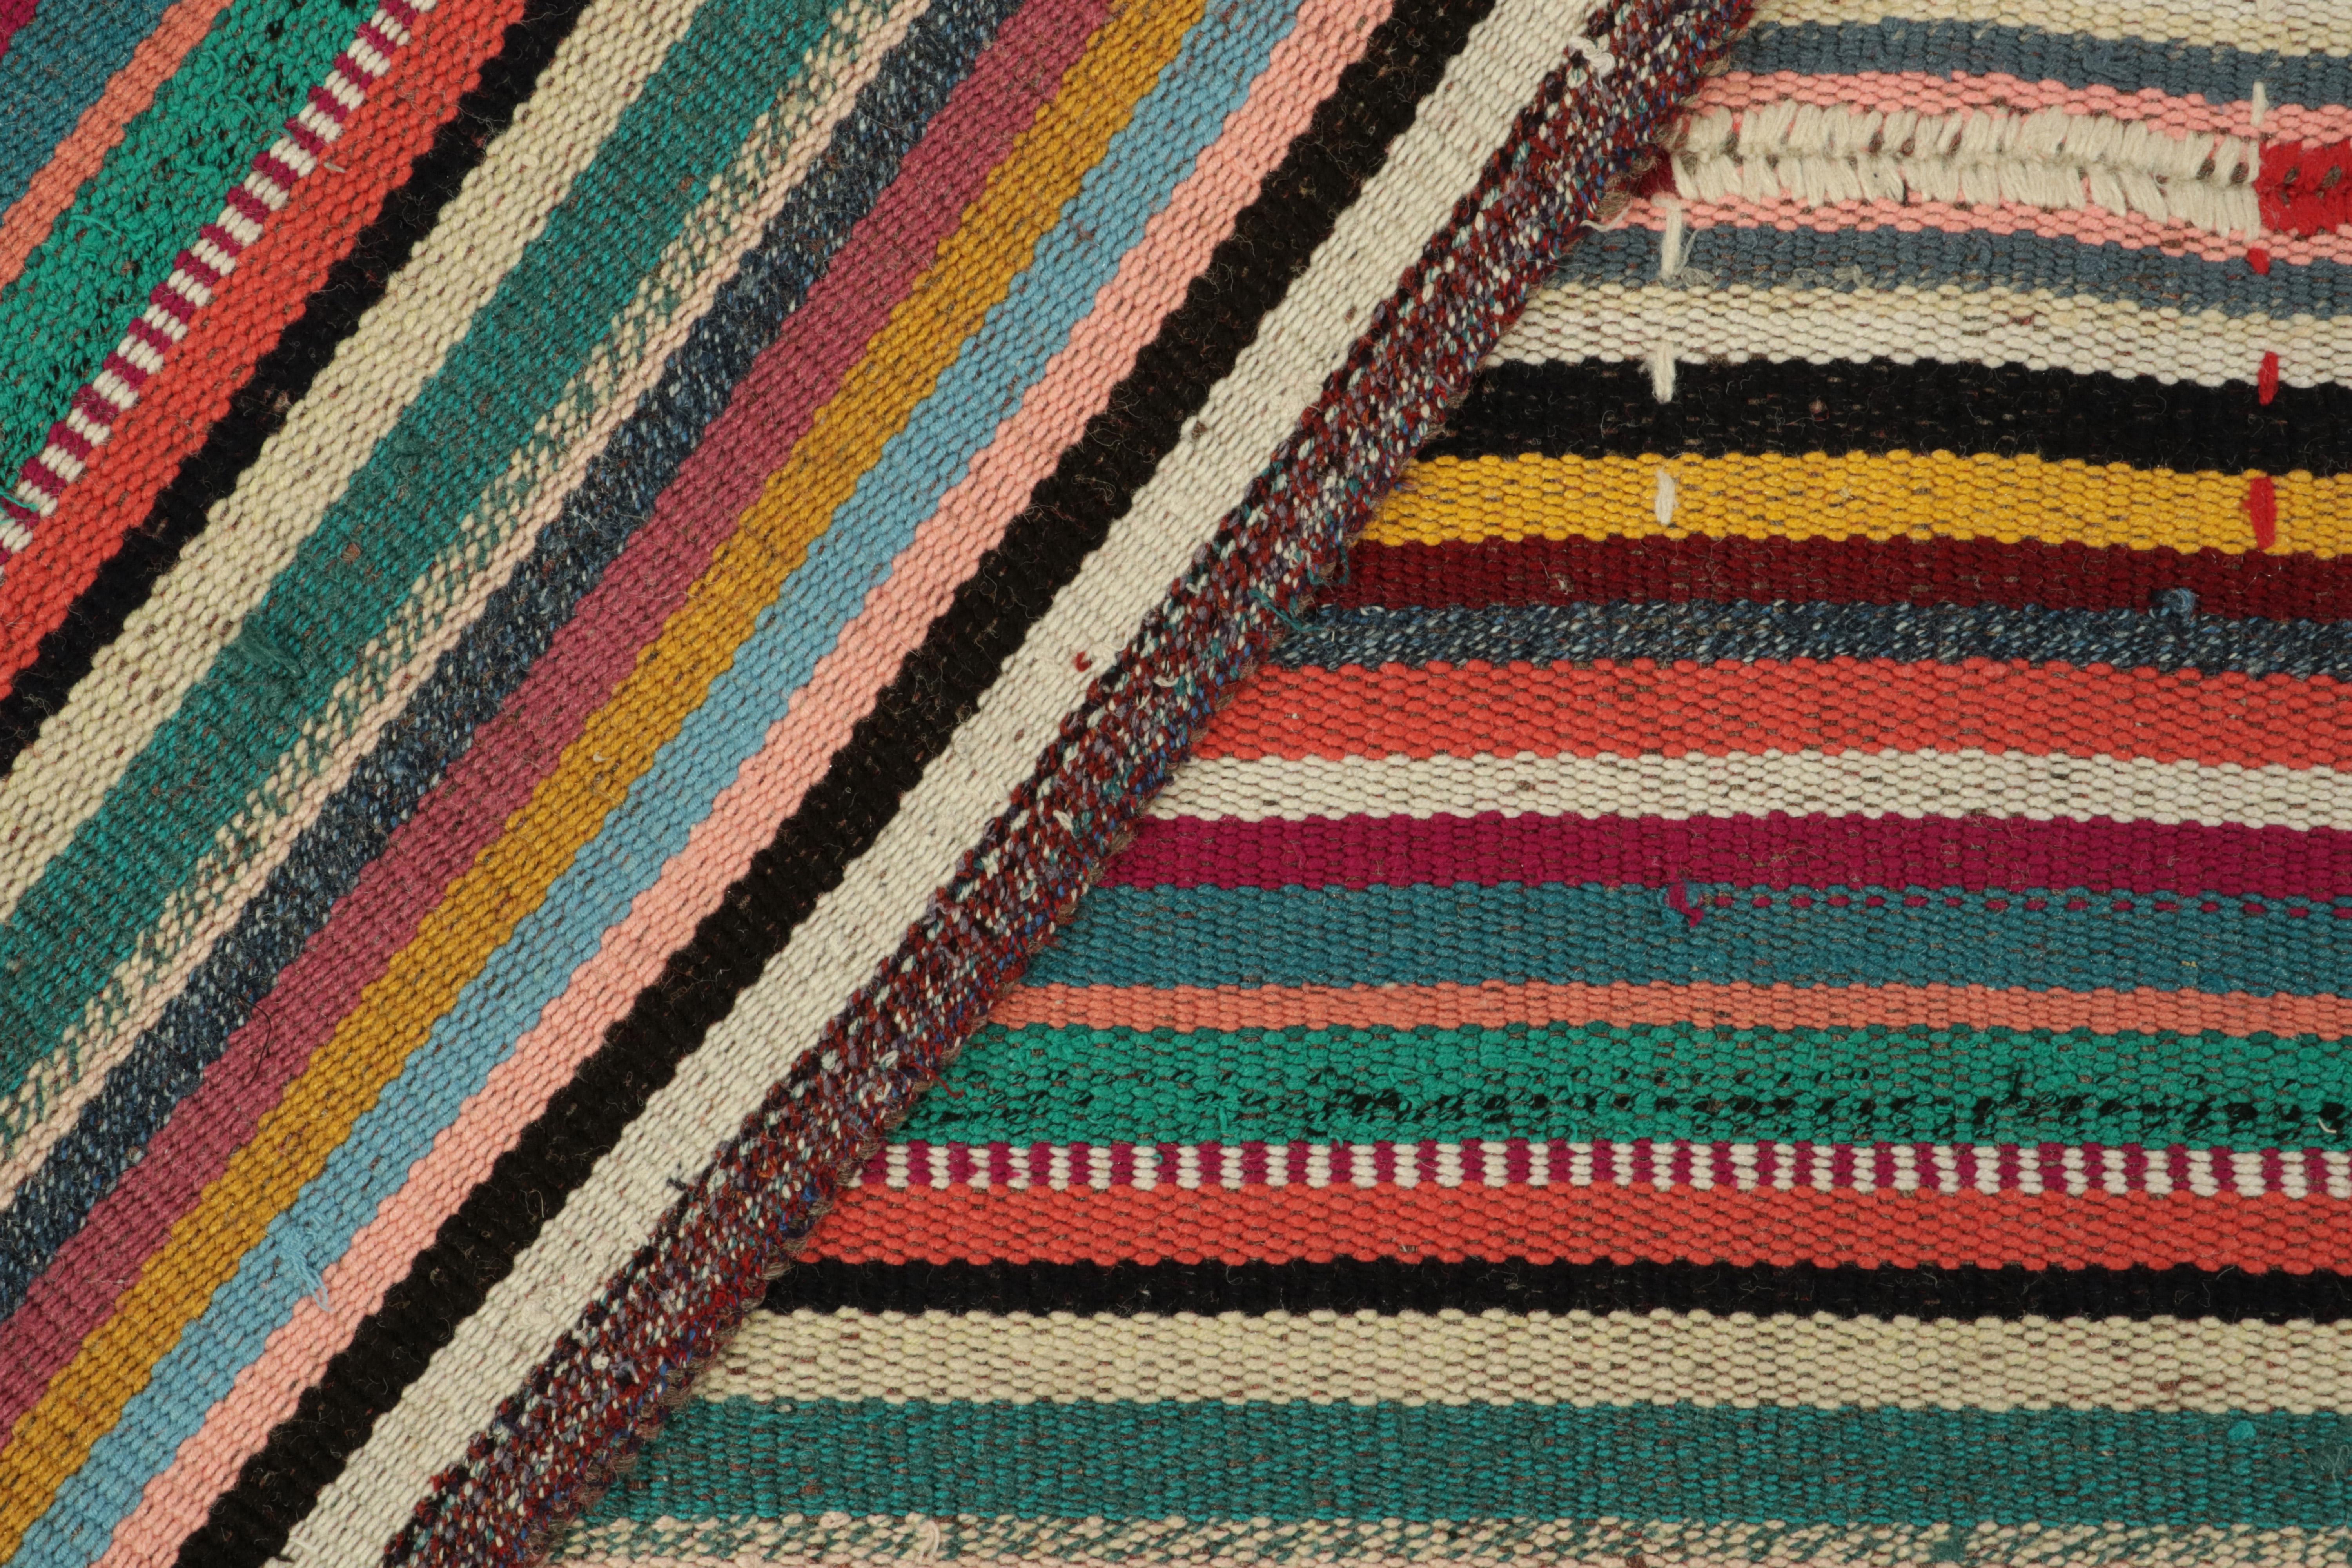 1950s Vintage Chaput Kilim Rug, Colorful Stripe Pattern Multihued by Rug & Kilim In Good Condition For Sale In Long Island City, NY